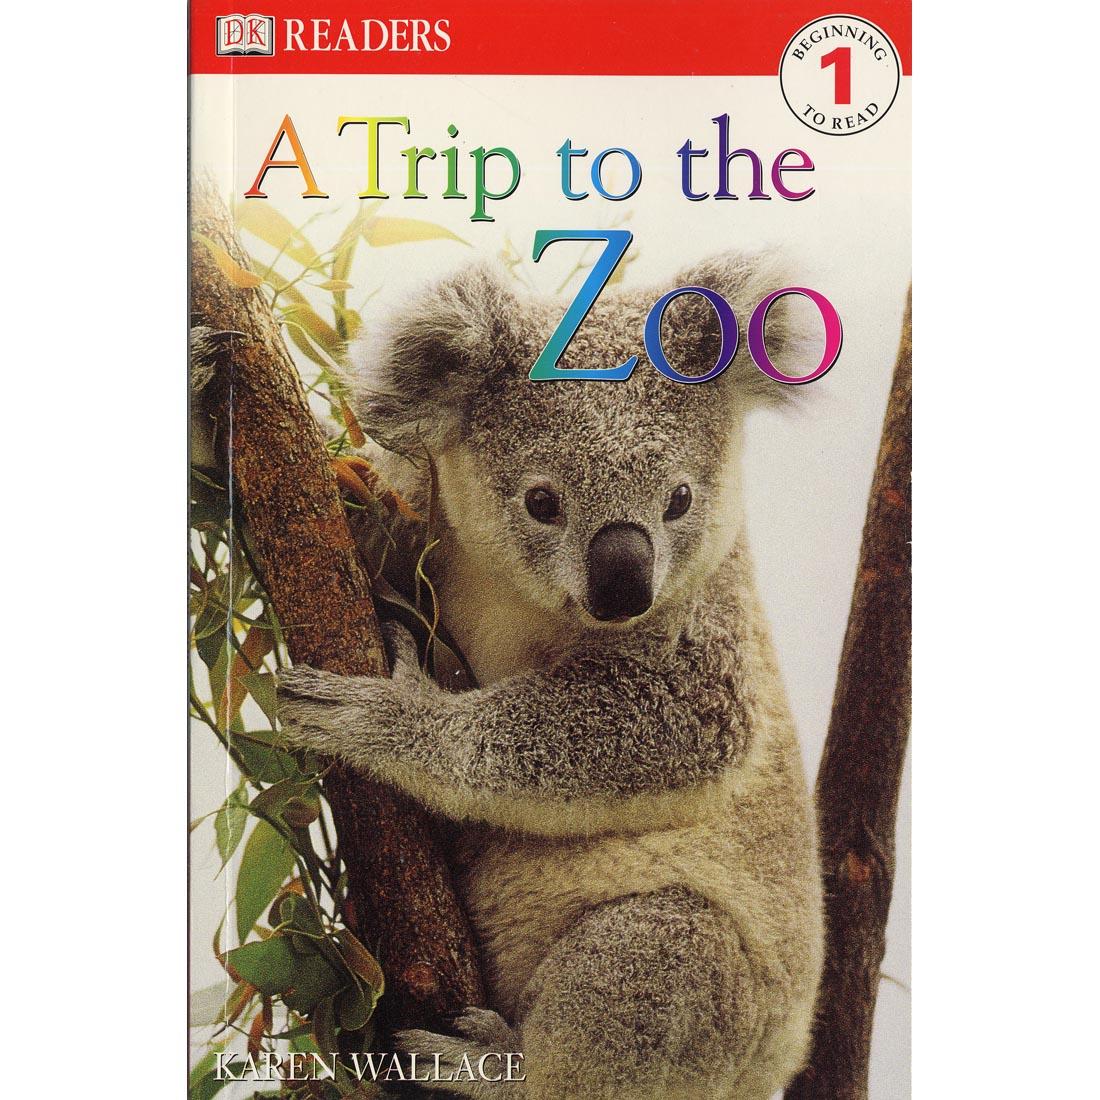 DK Readers Level 1 Book: A Trip to the Zoo